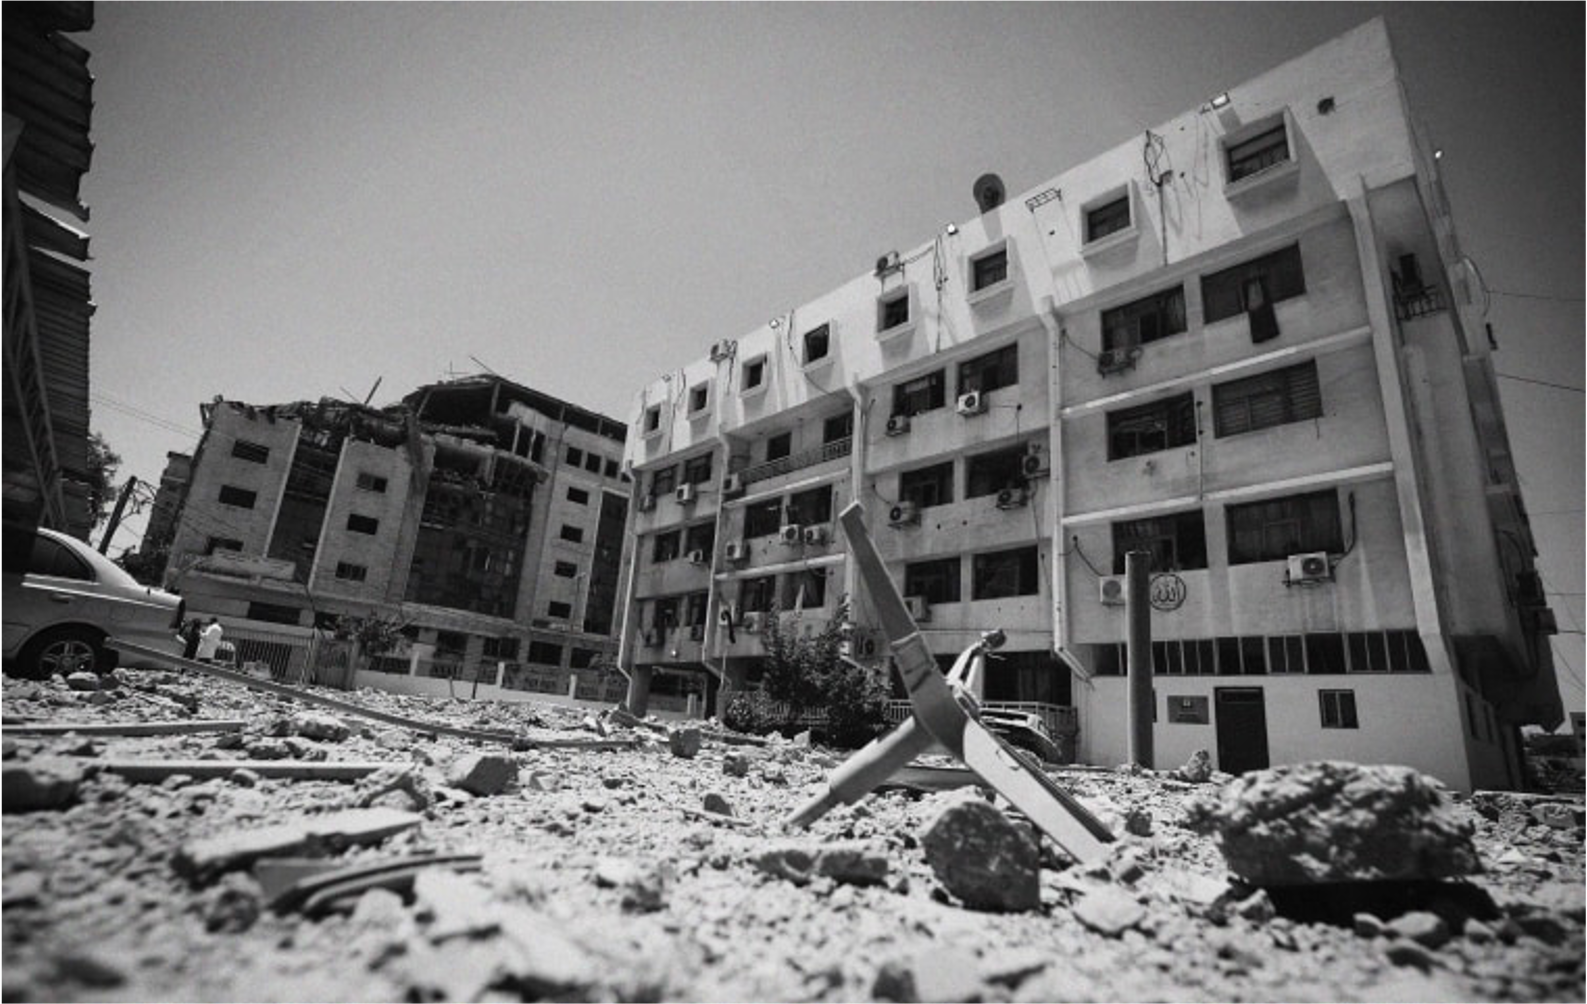 A black and white picture of the Gaza Ministry of Health. The building is damaged, with detritus in front.